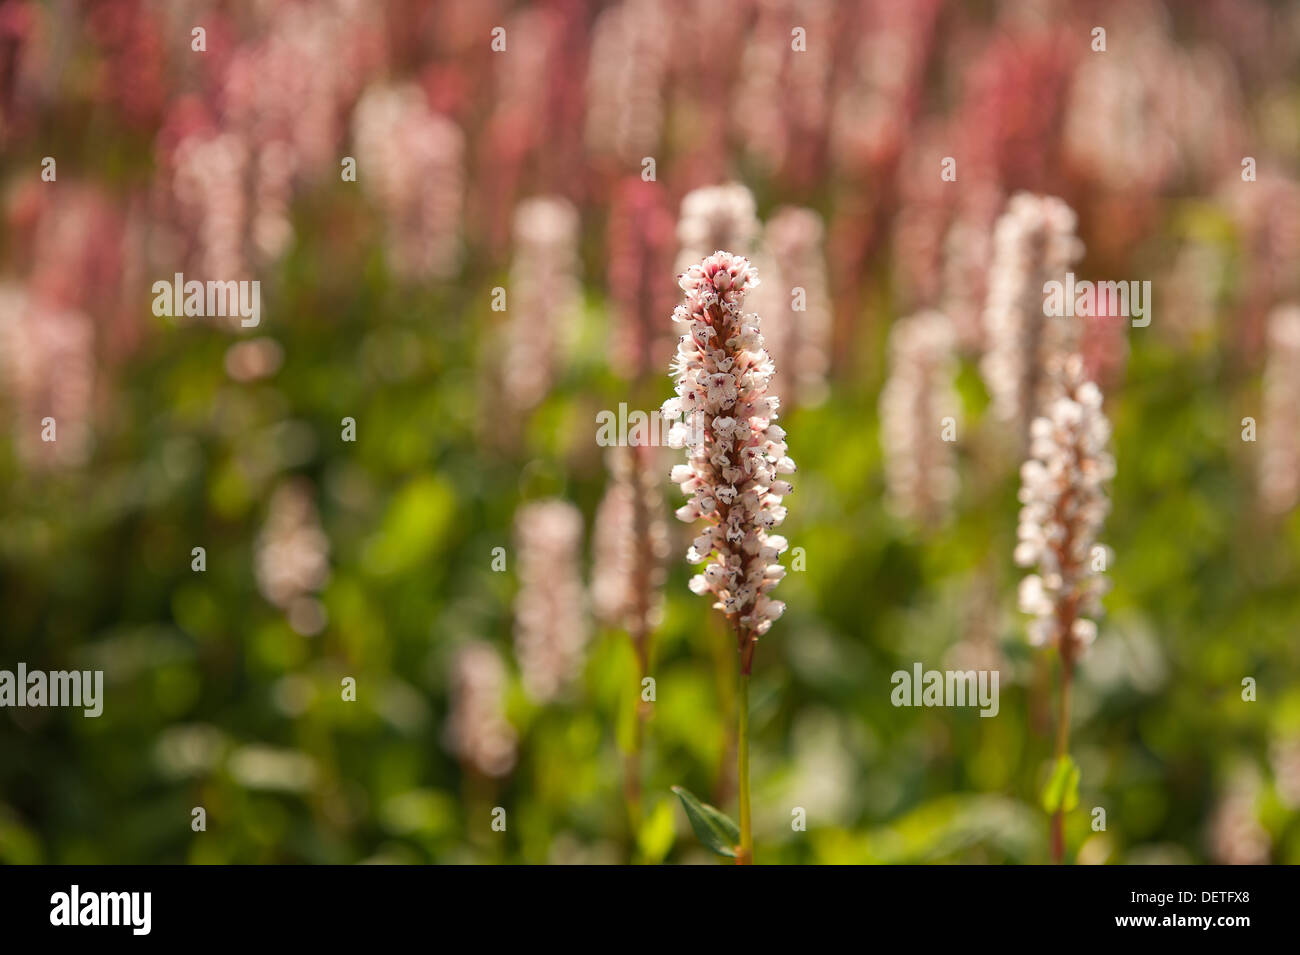 Pink red  white blooms of Persicaria Affinis fleece flower Himalayan Knotweed contrast with green leaves Stock Photo